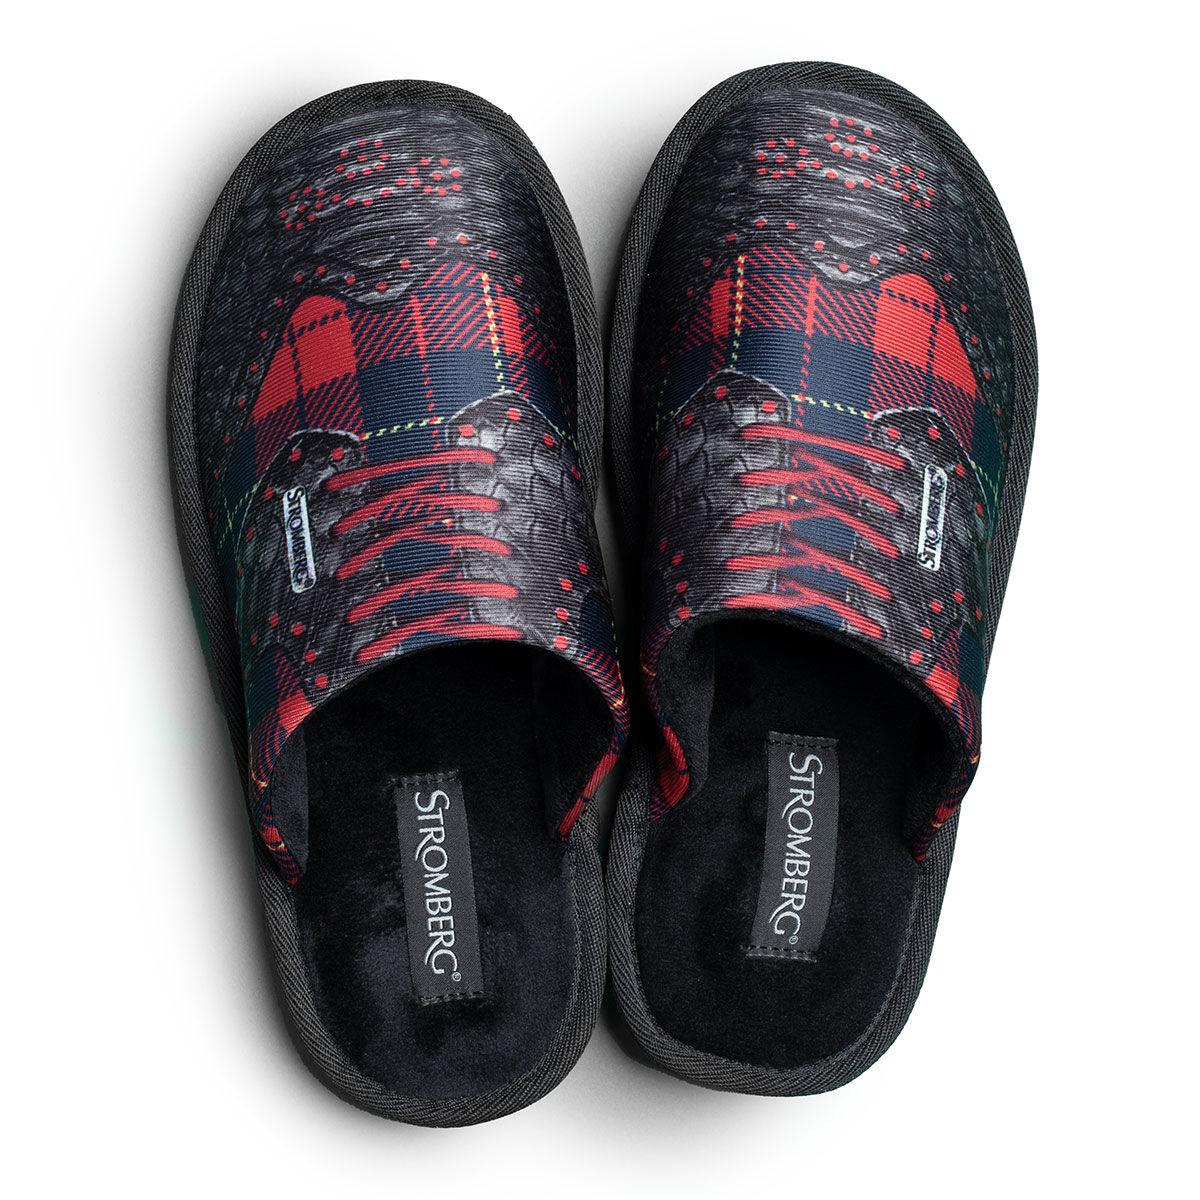 Stromberg Black, Grey and Red Comfortable Tartan Mule Golf Slippers, Size: 6 | American Golf - Father's Day Gift von Stromberg